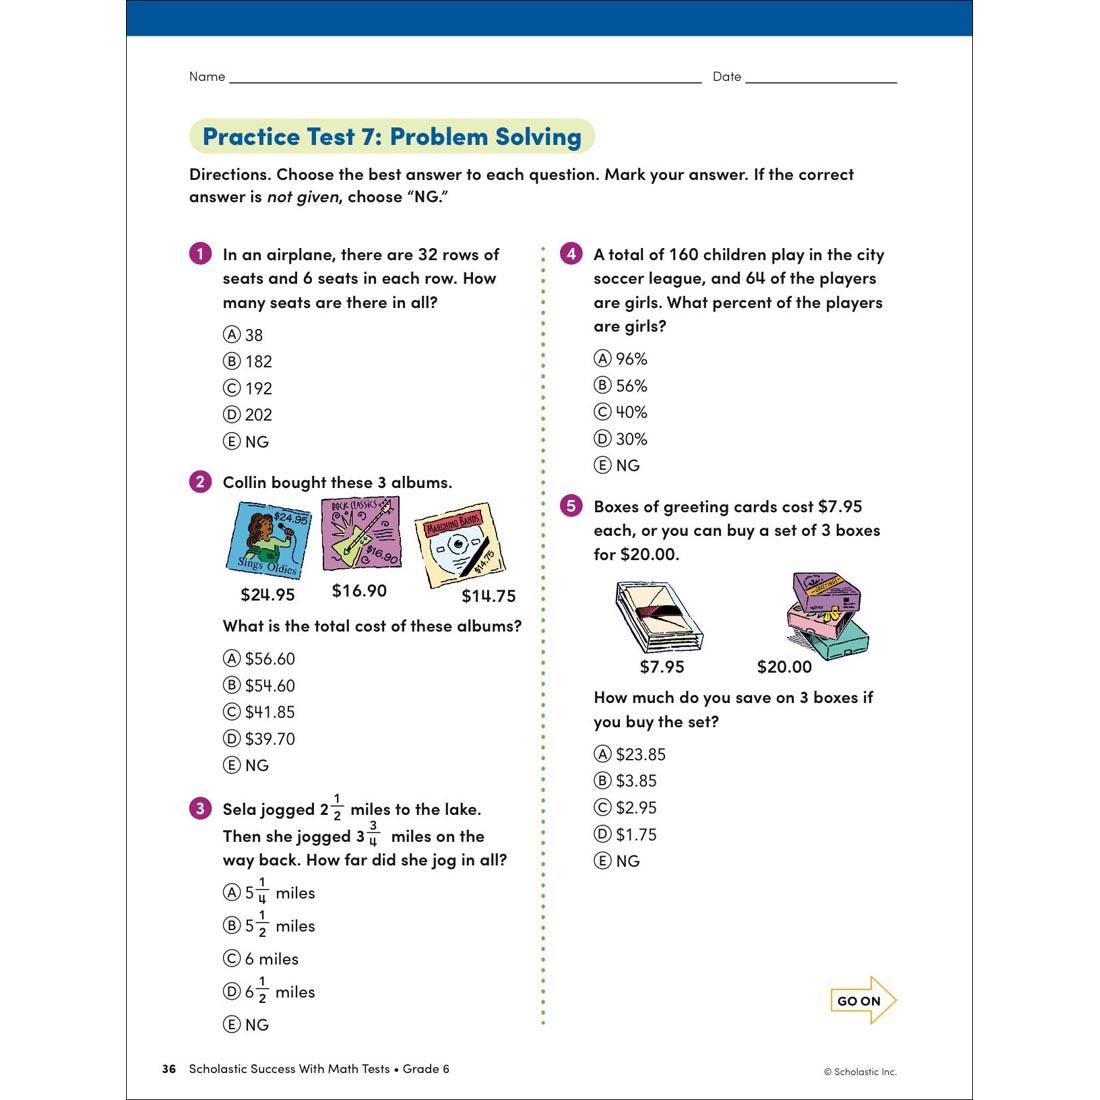 page 36 from Scholastic Success With Math Tests Workbook Grade 6